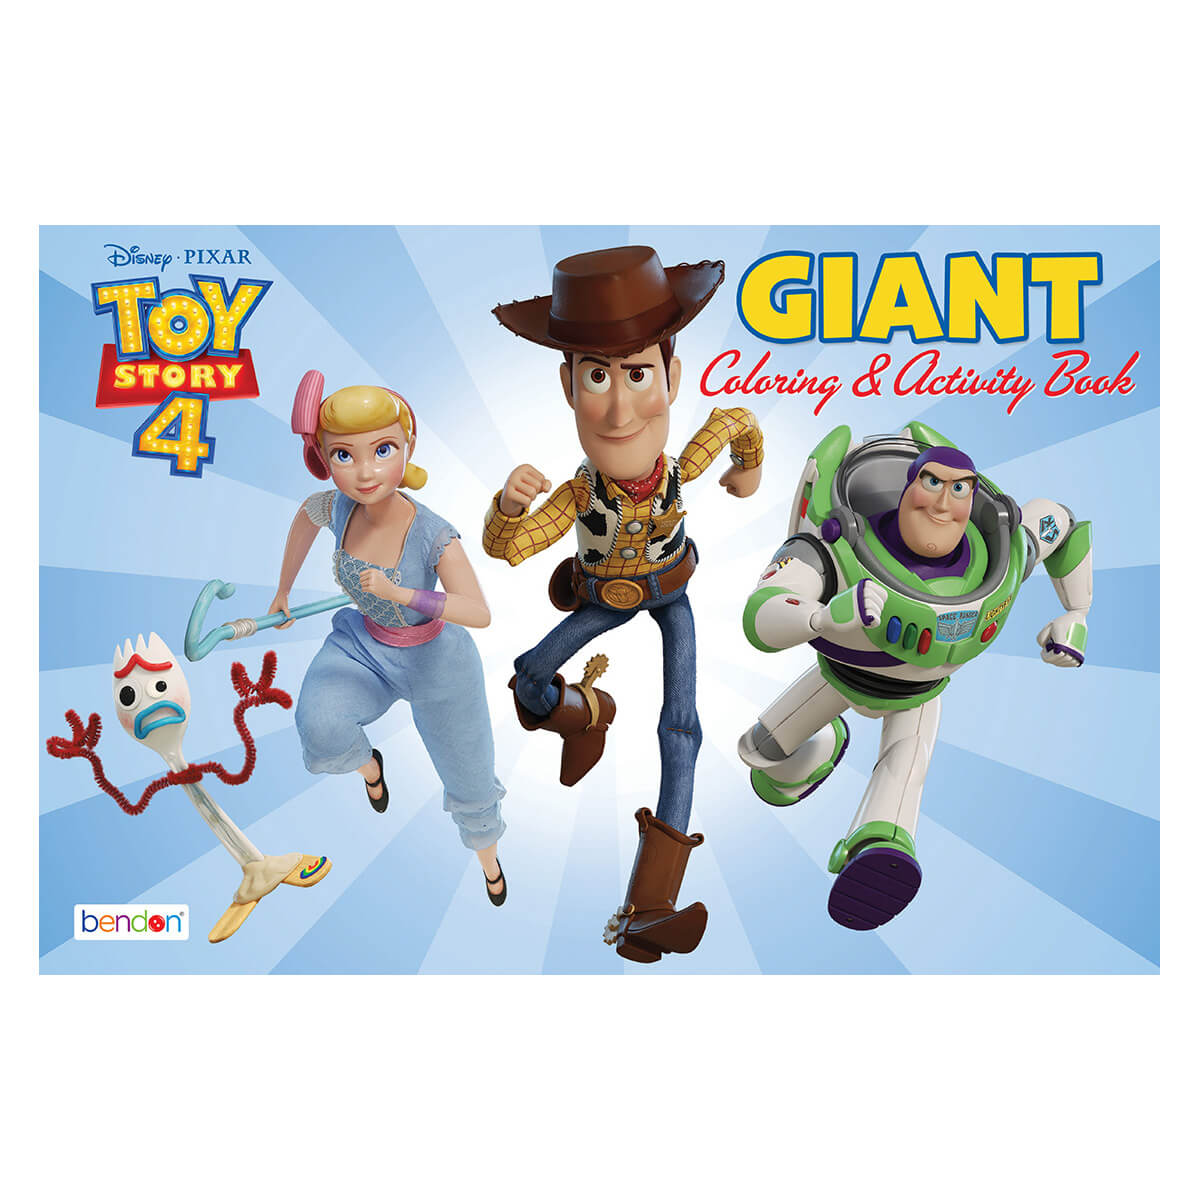 Bendon Toy Story 4 Giant 11" x 16" Coloring and Activity Book